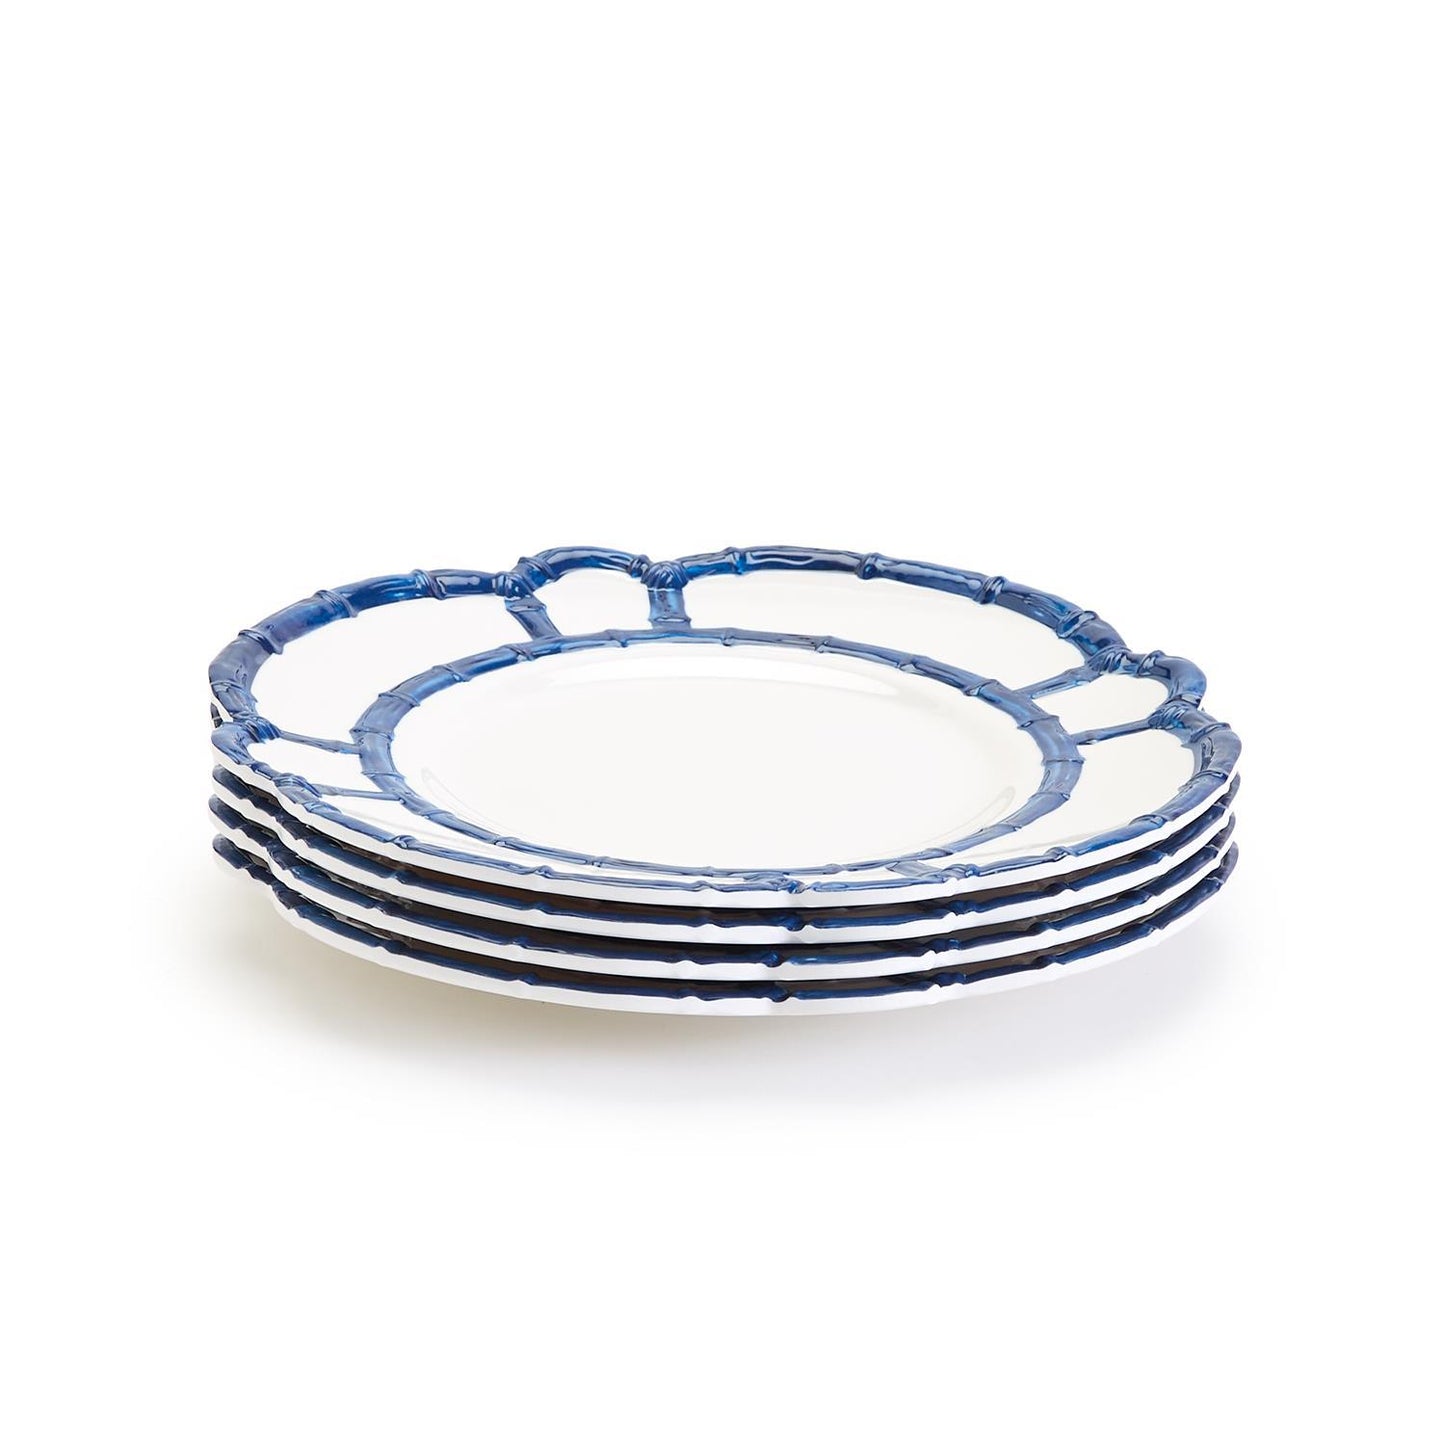 Blue Bamboo Set of 4 Dinner Plates with Bamboo Rim